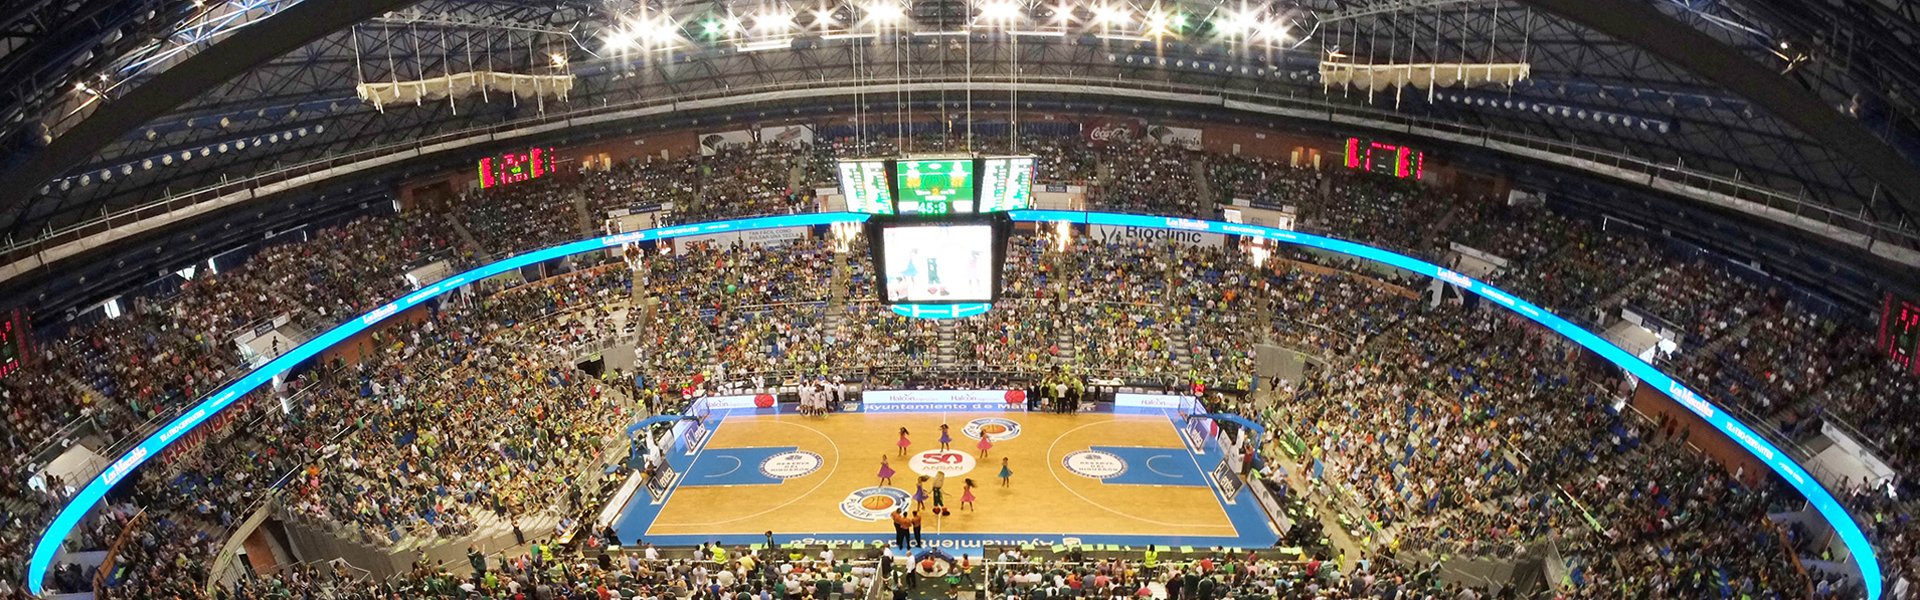 Arena during a match